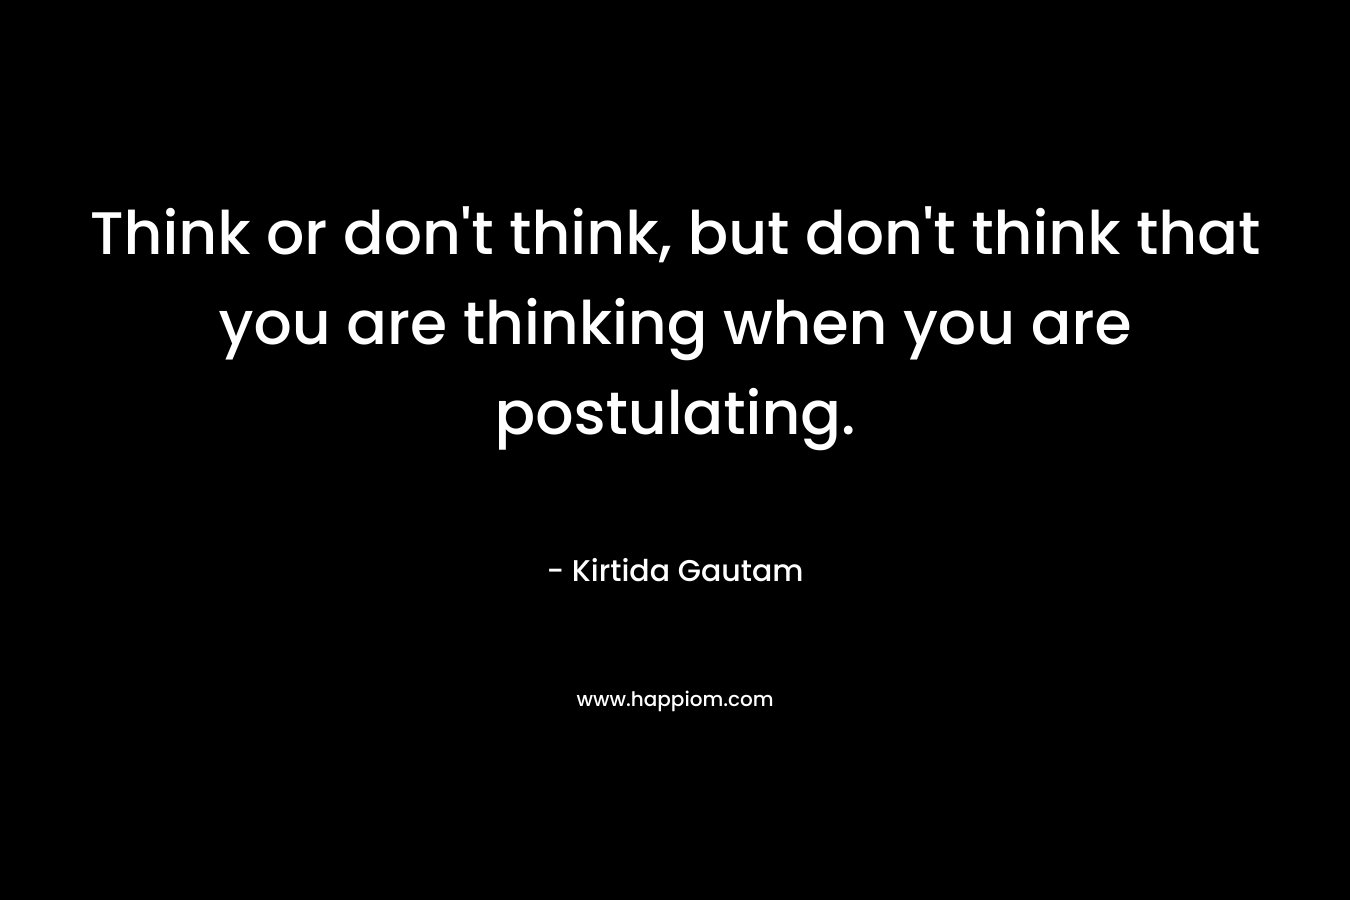 Think or don't think, but don't think that you are thinking when you are postulating.